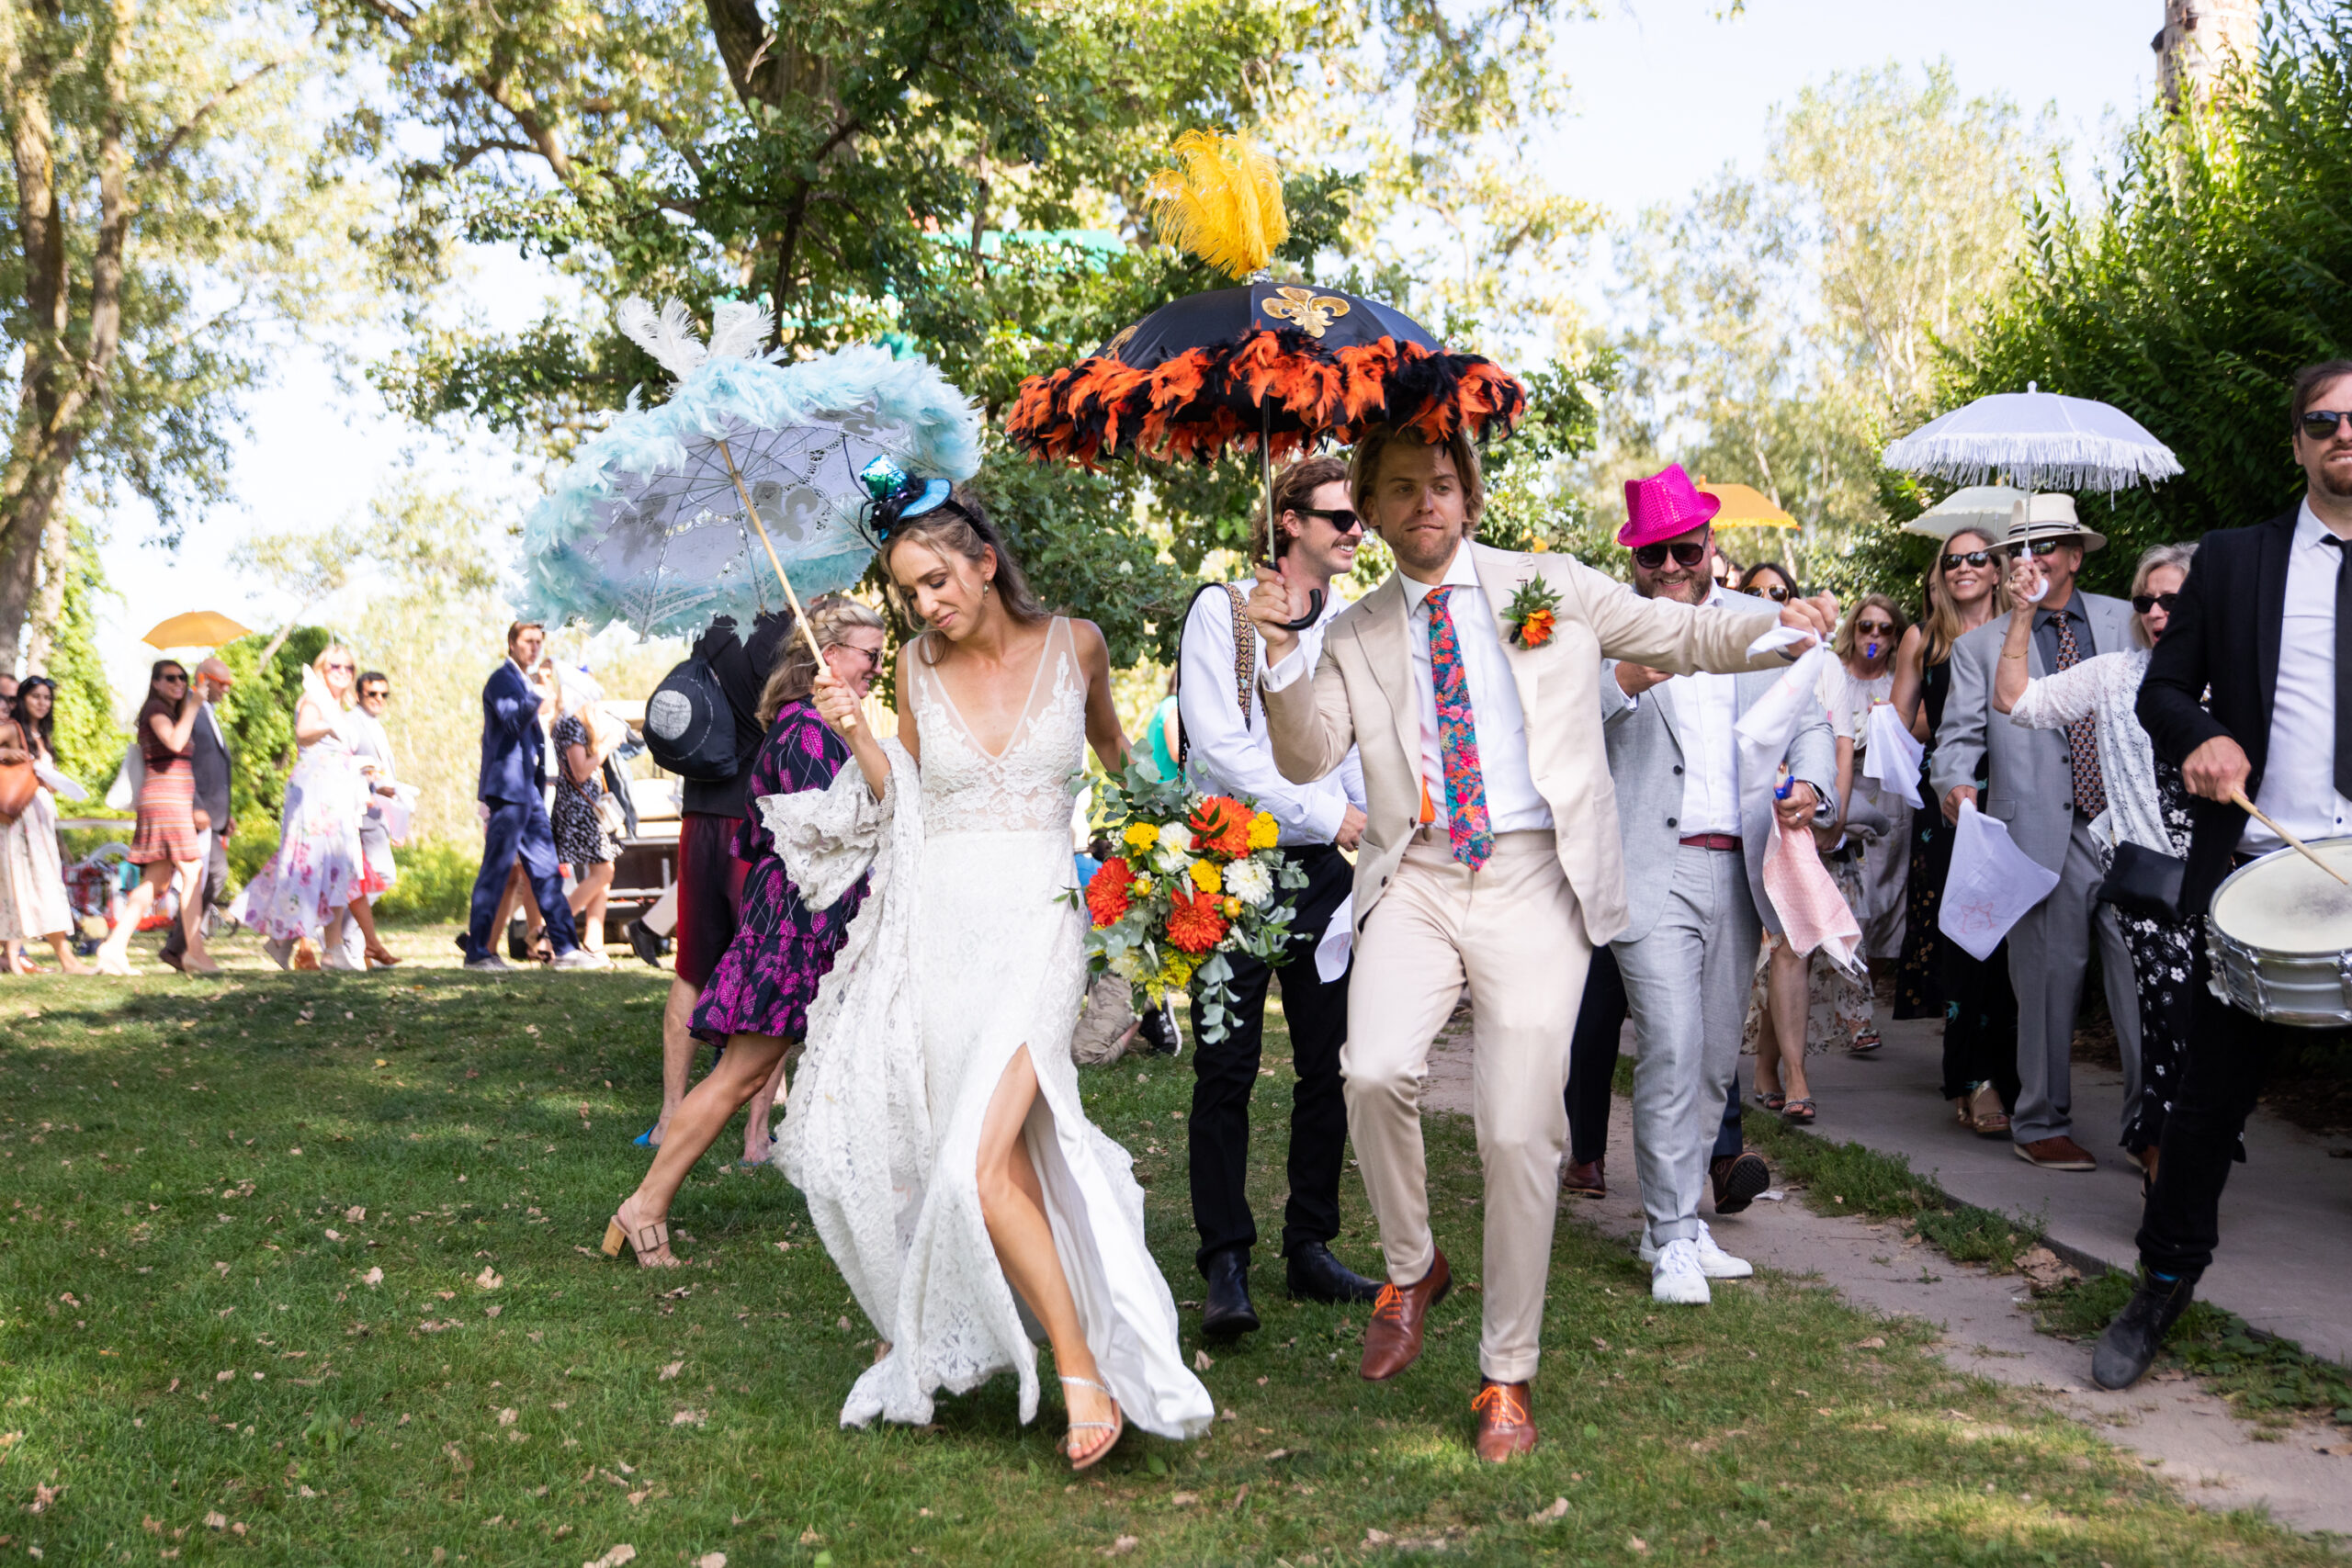 Bride and Groom celebrate wedding ceremony with second line dance parade